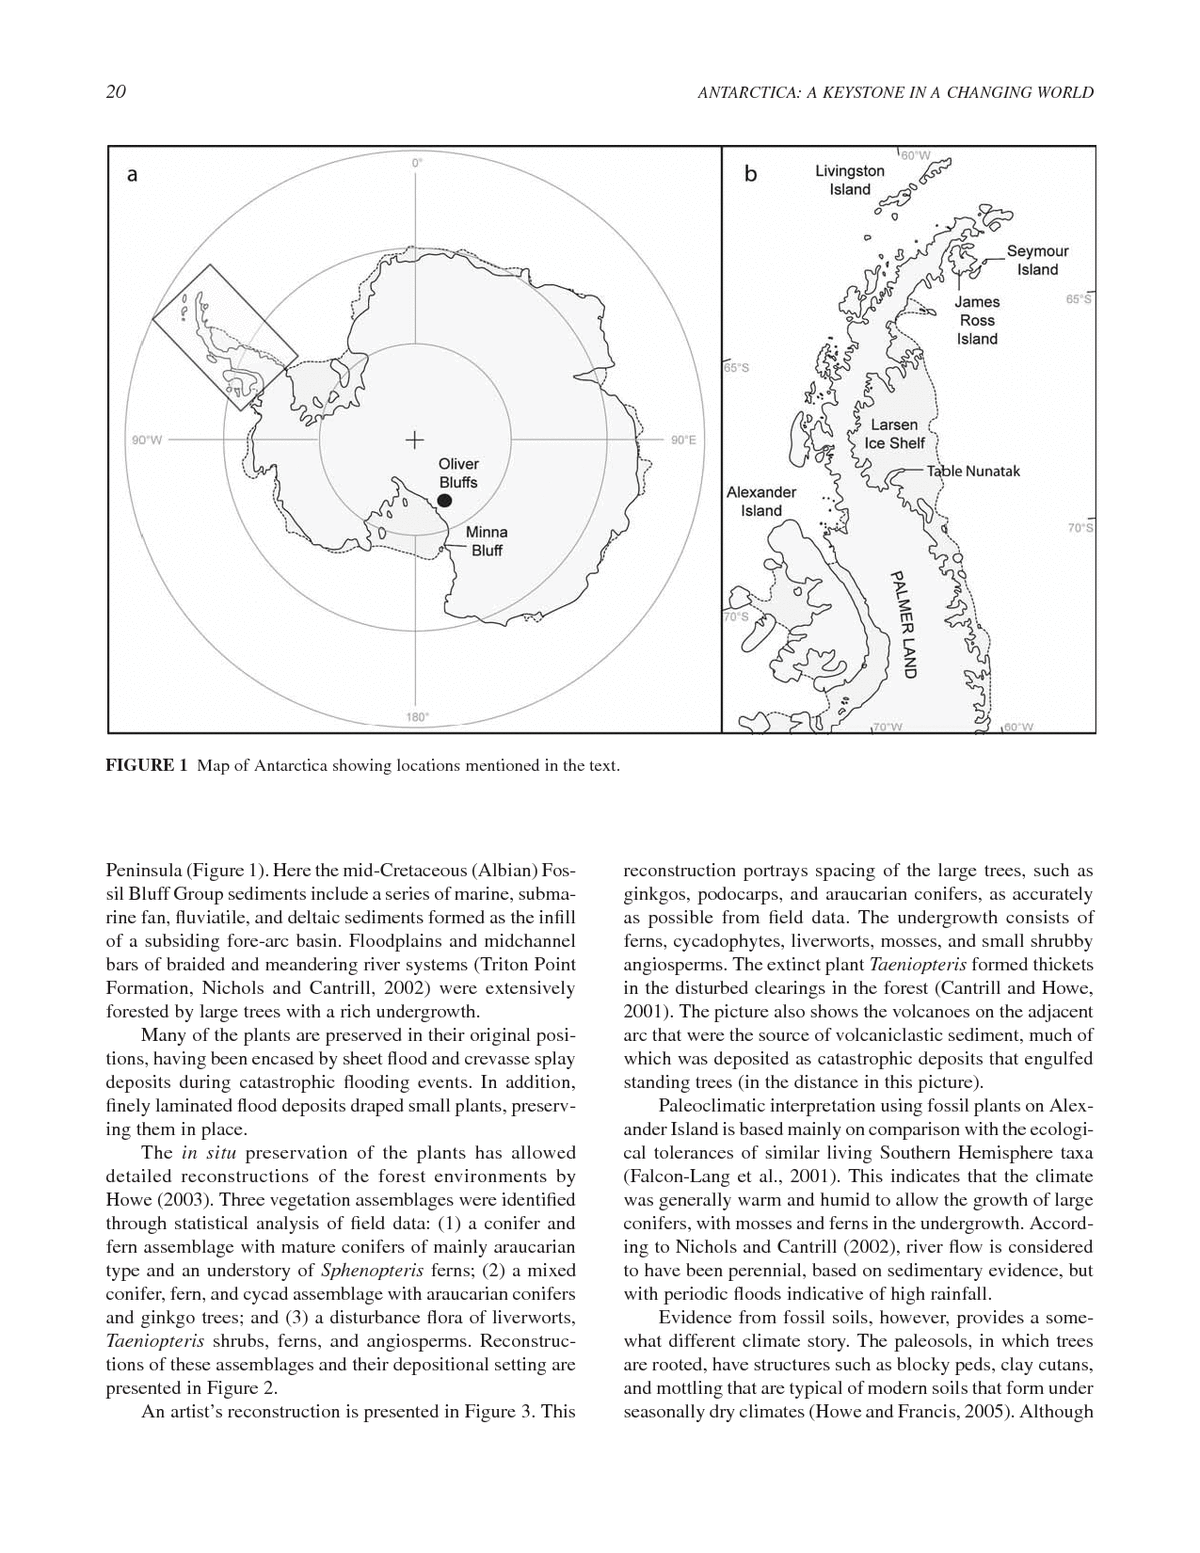 100 Million Years Of Antarctic Climate Evolution Evidence From Fossil Plants J E Francis A Ashworth D J Cantrill J A Crame J Howe R Stephens A M Tosolini And V Thorn Antarctica